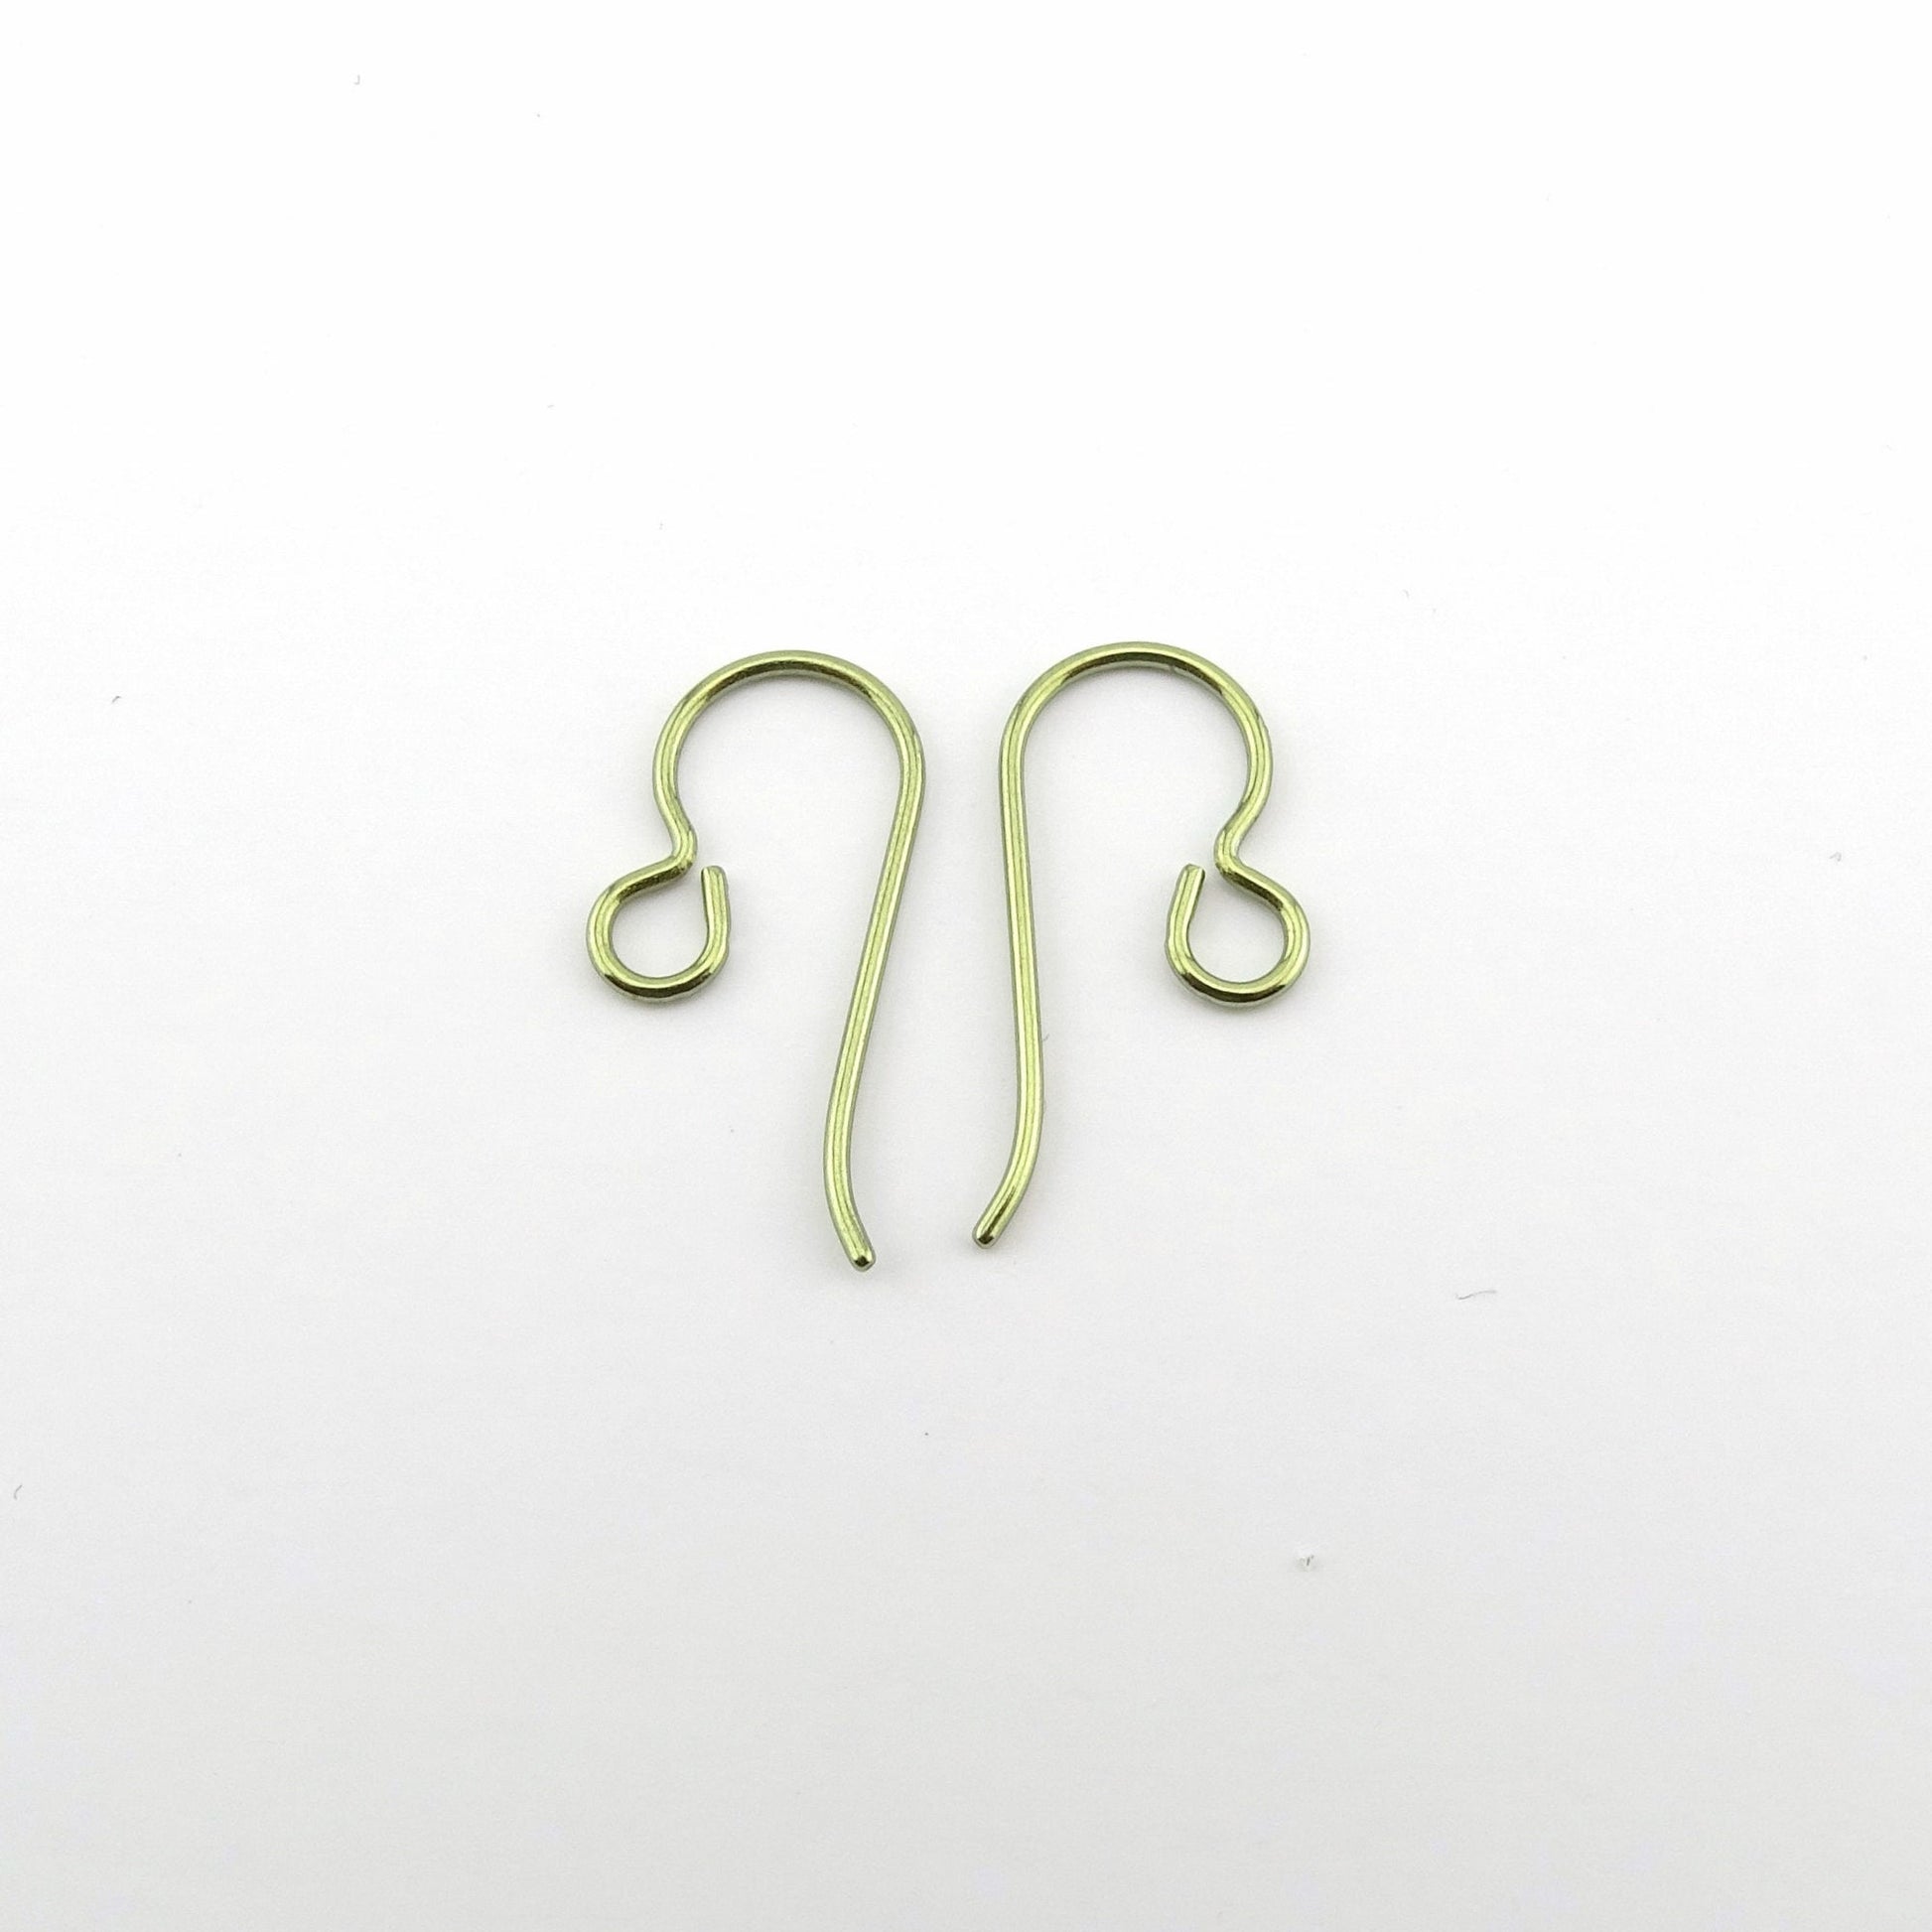 10 Silver Nickel Free Hypo-Allergenic Titanium French Hook Earring Findings with Open Loop Ring